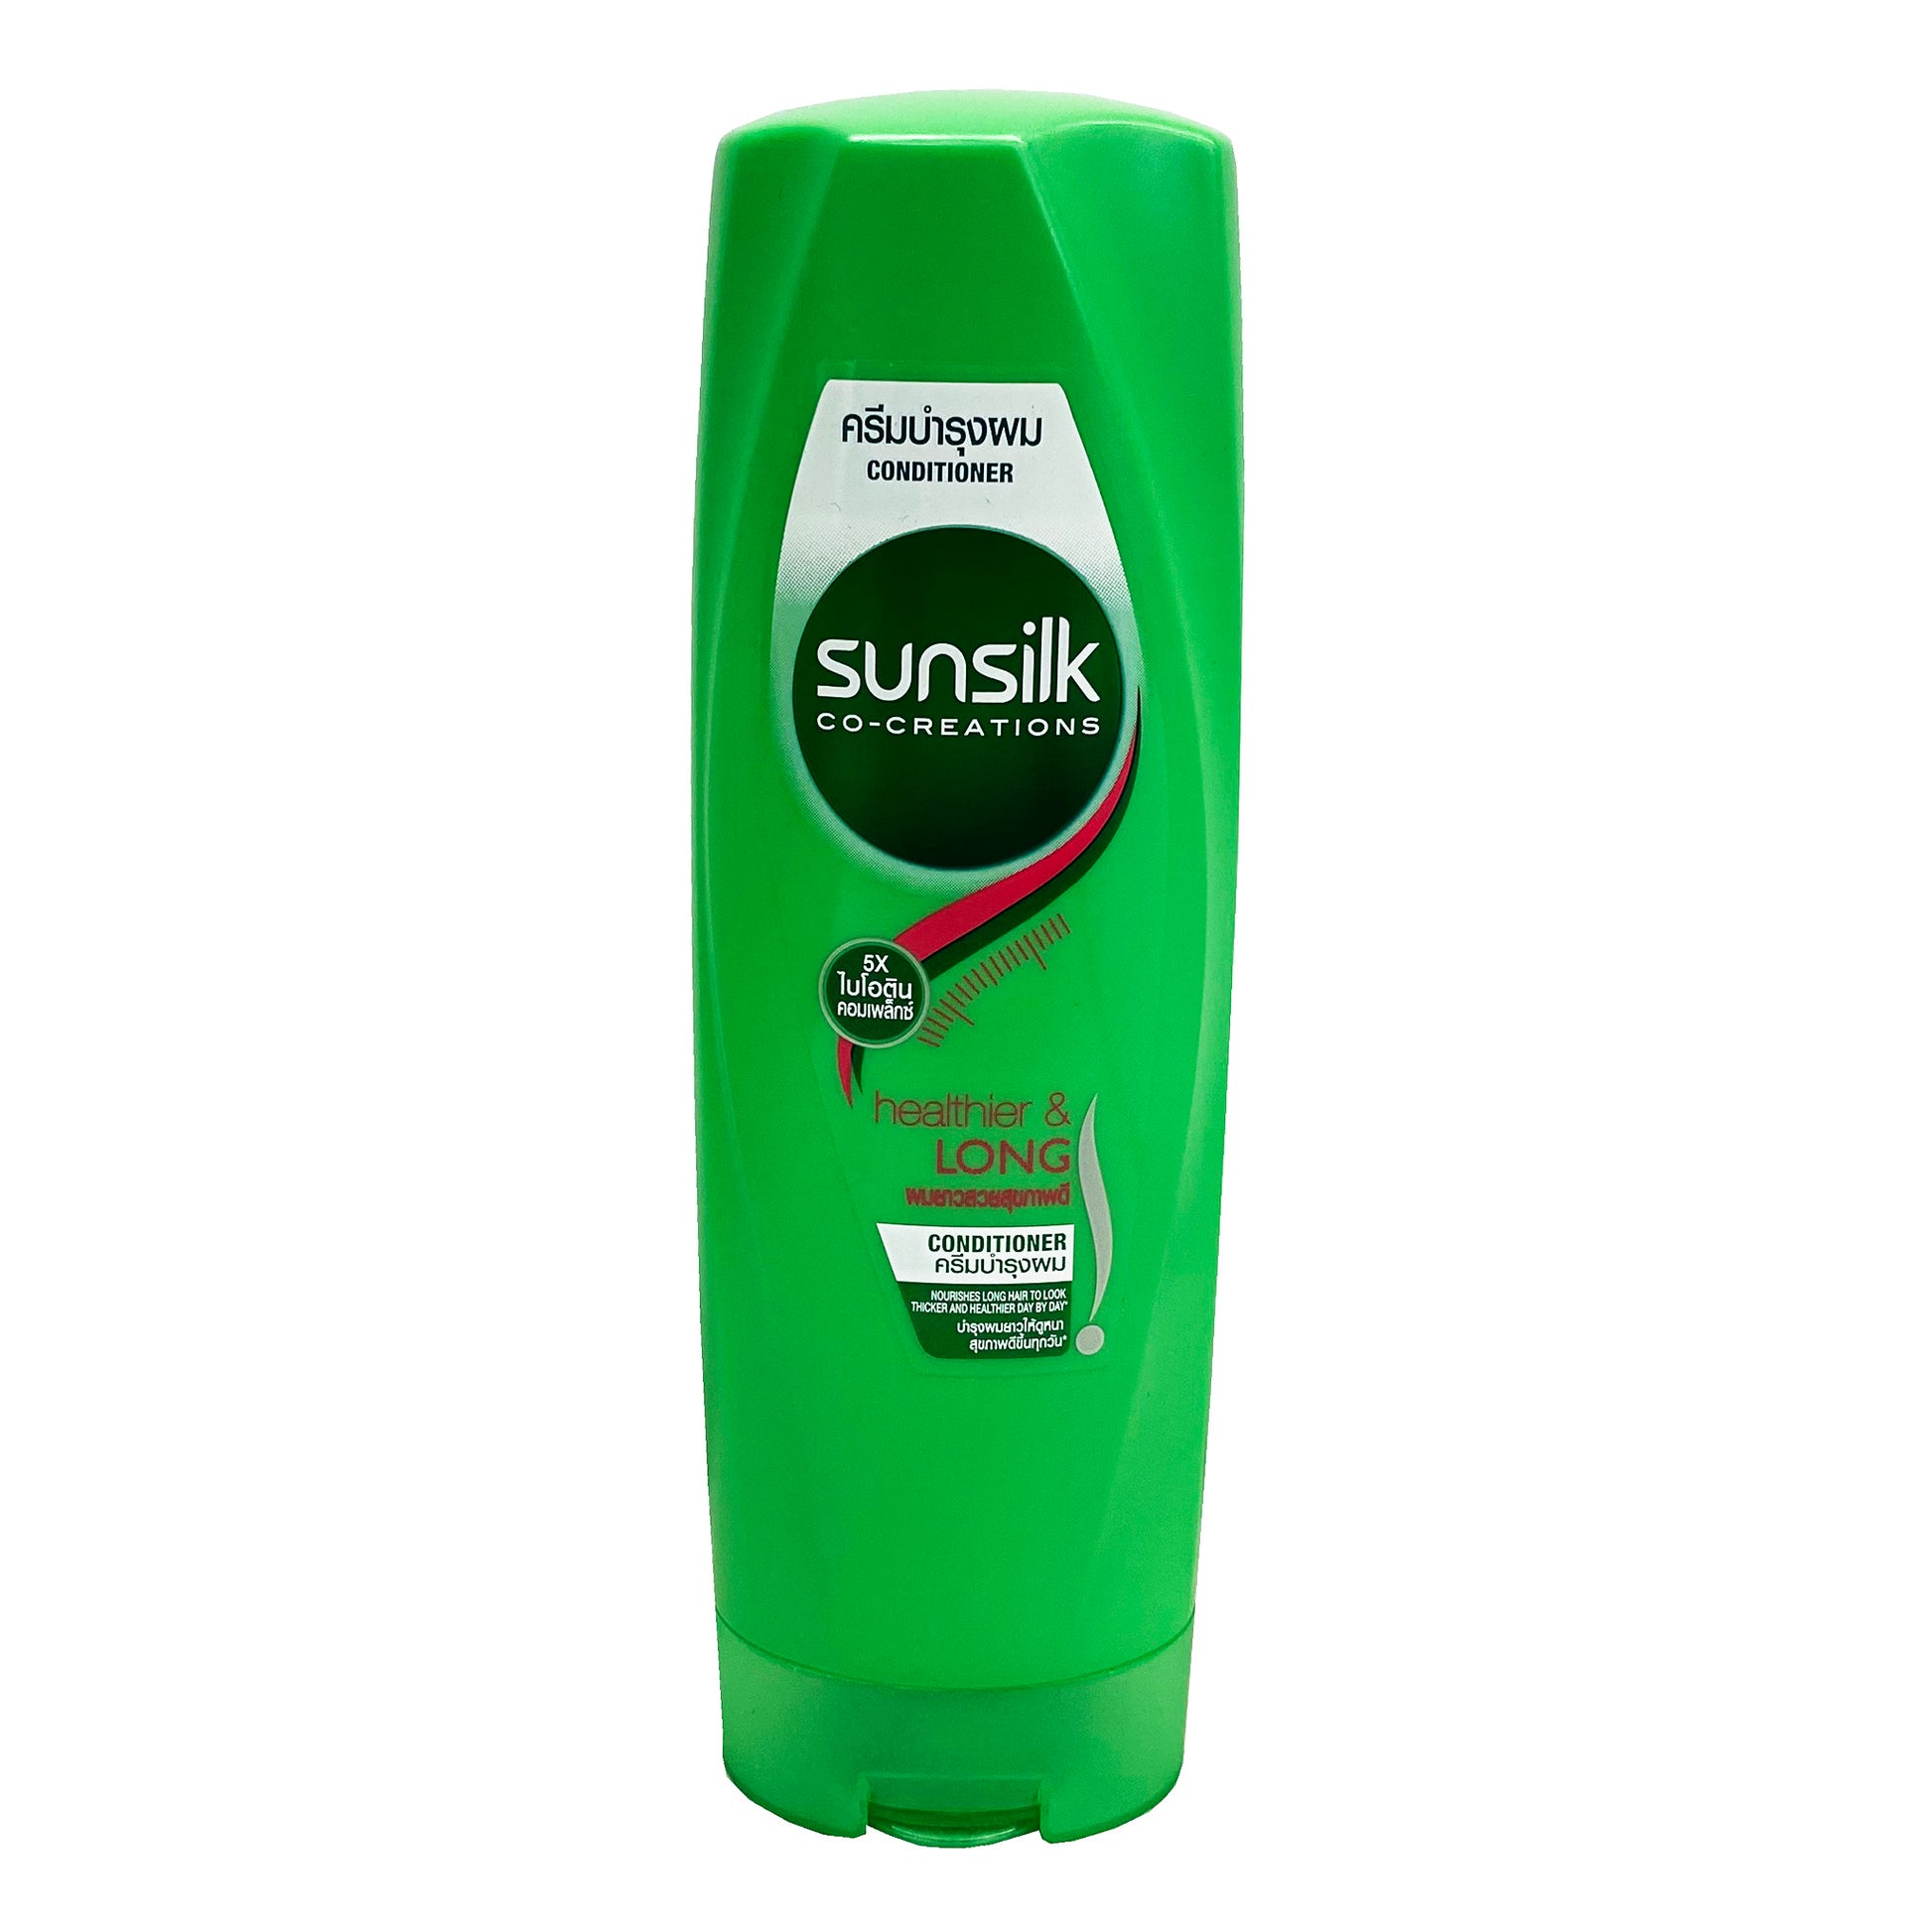 Front graphic view of Sunsilk Healthier and Long Conditioner Green 10.82oz (320ml)